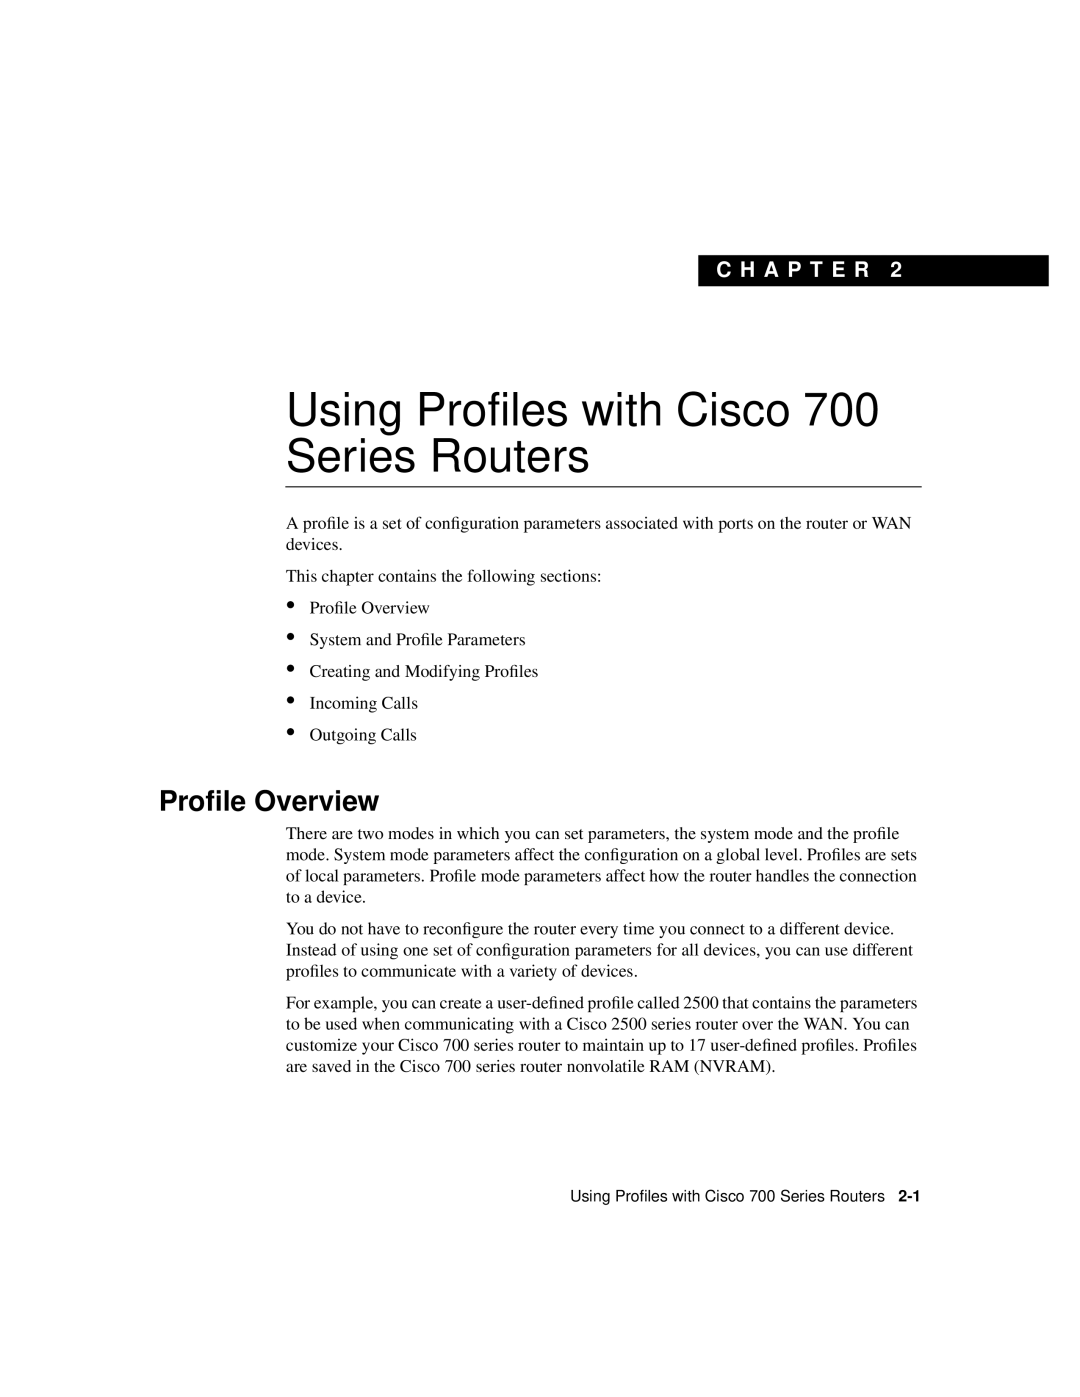 Cisco Systems manual Proﬁle Overview, Using Profiles with Cisco 700 Series Routers, C H A P T E R 